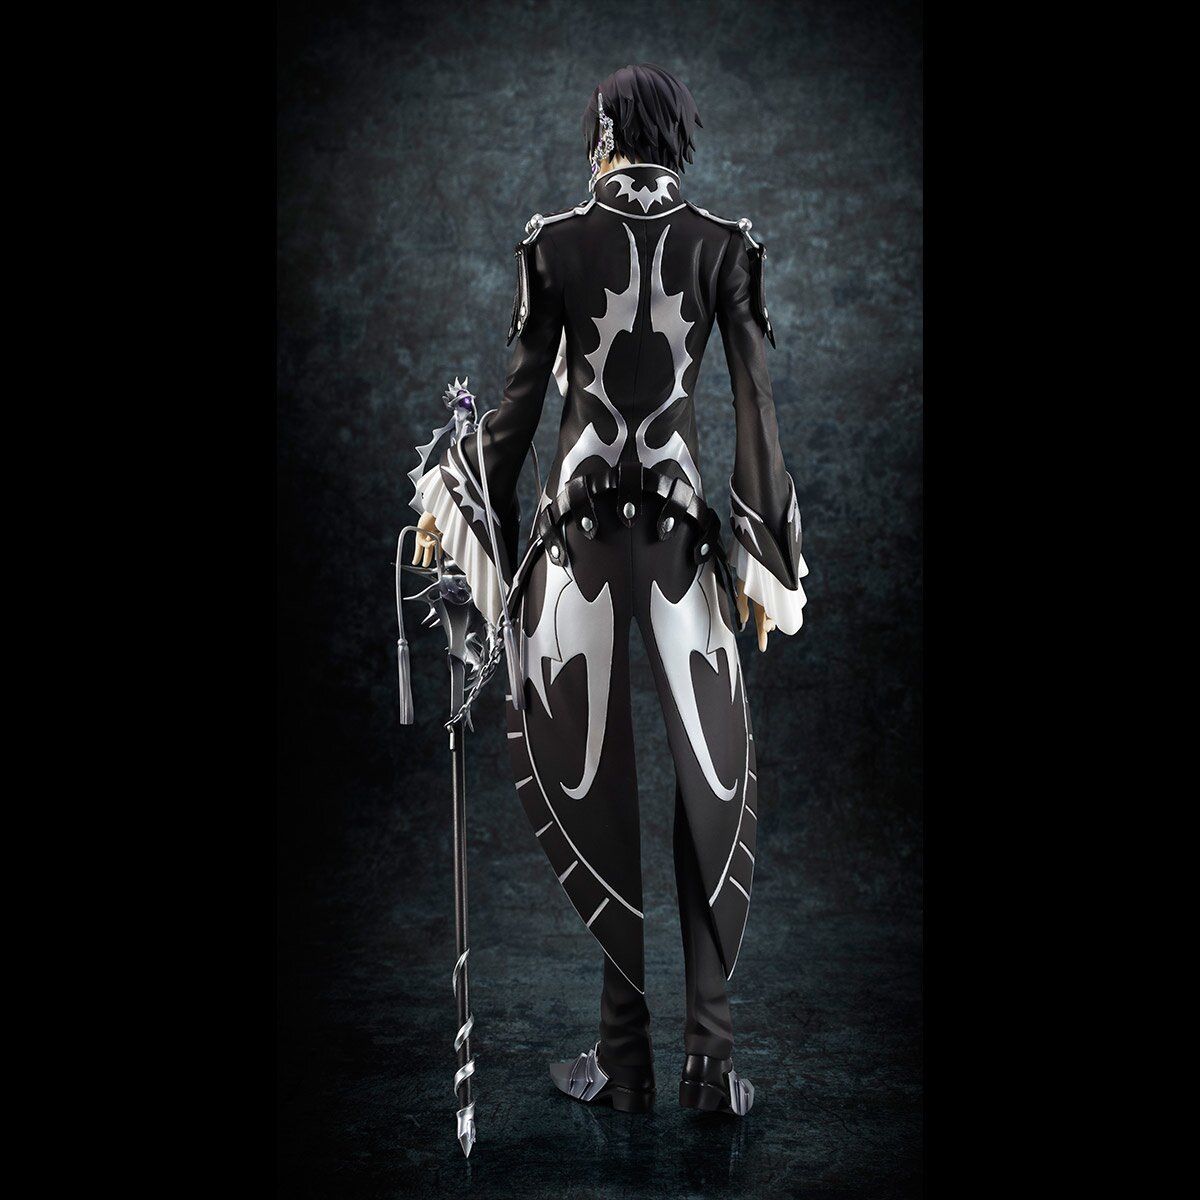 G.E.M. Series: Code Geass Lelouch of the Rebellion R2 - CLAMP works in –  megahobby